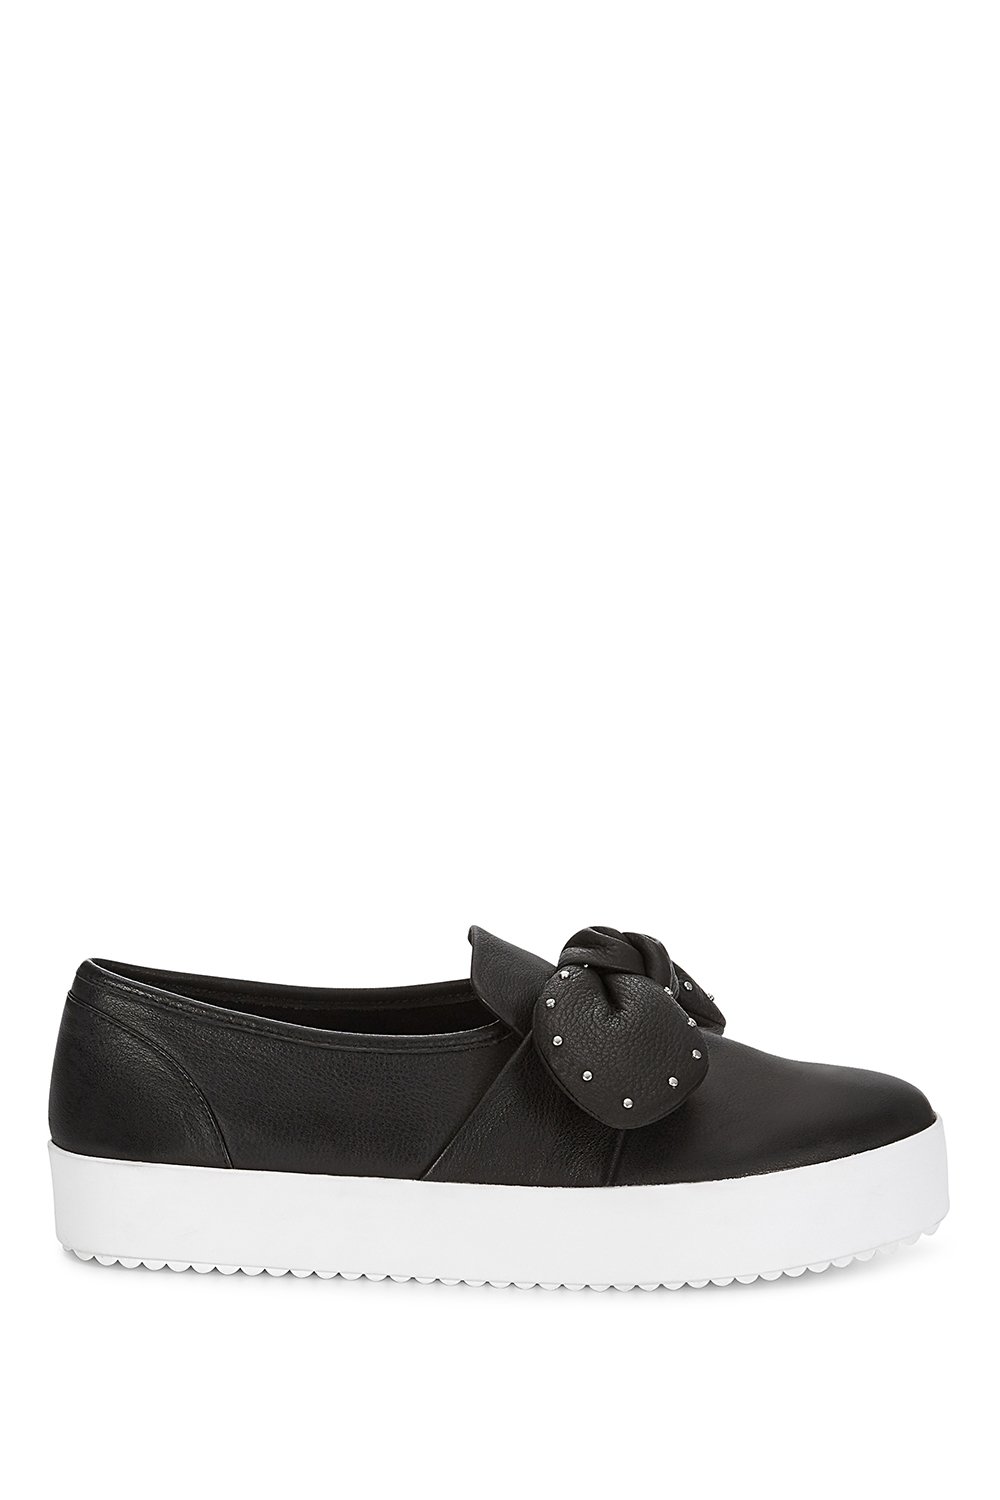 Stacey Sneaker With Studs